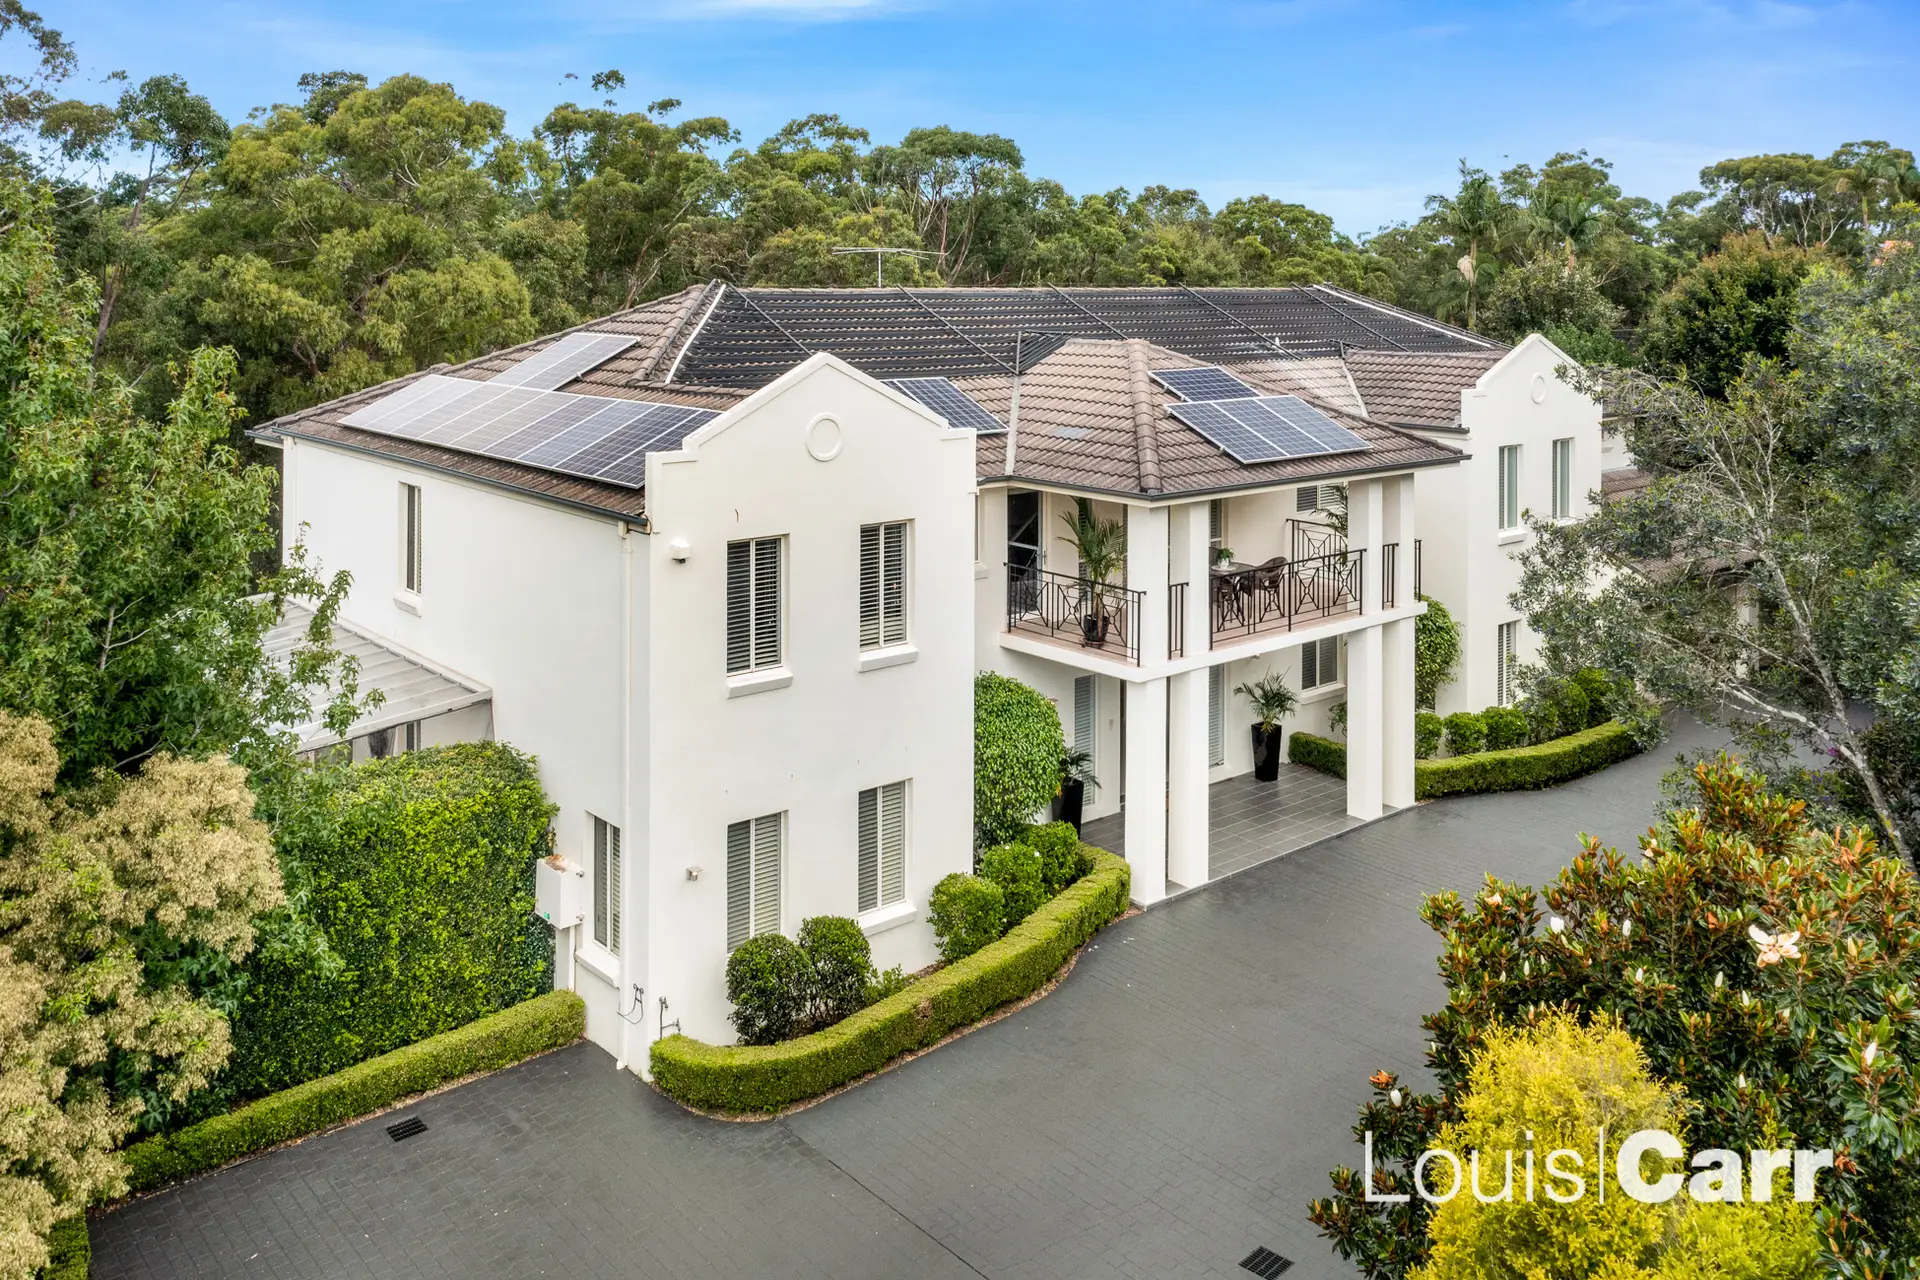 Photo #18: 4 Governor Phillip Place, West Pennant Hills - Sold by Louis Carr Real Estate